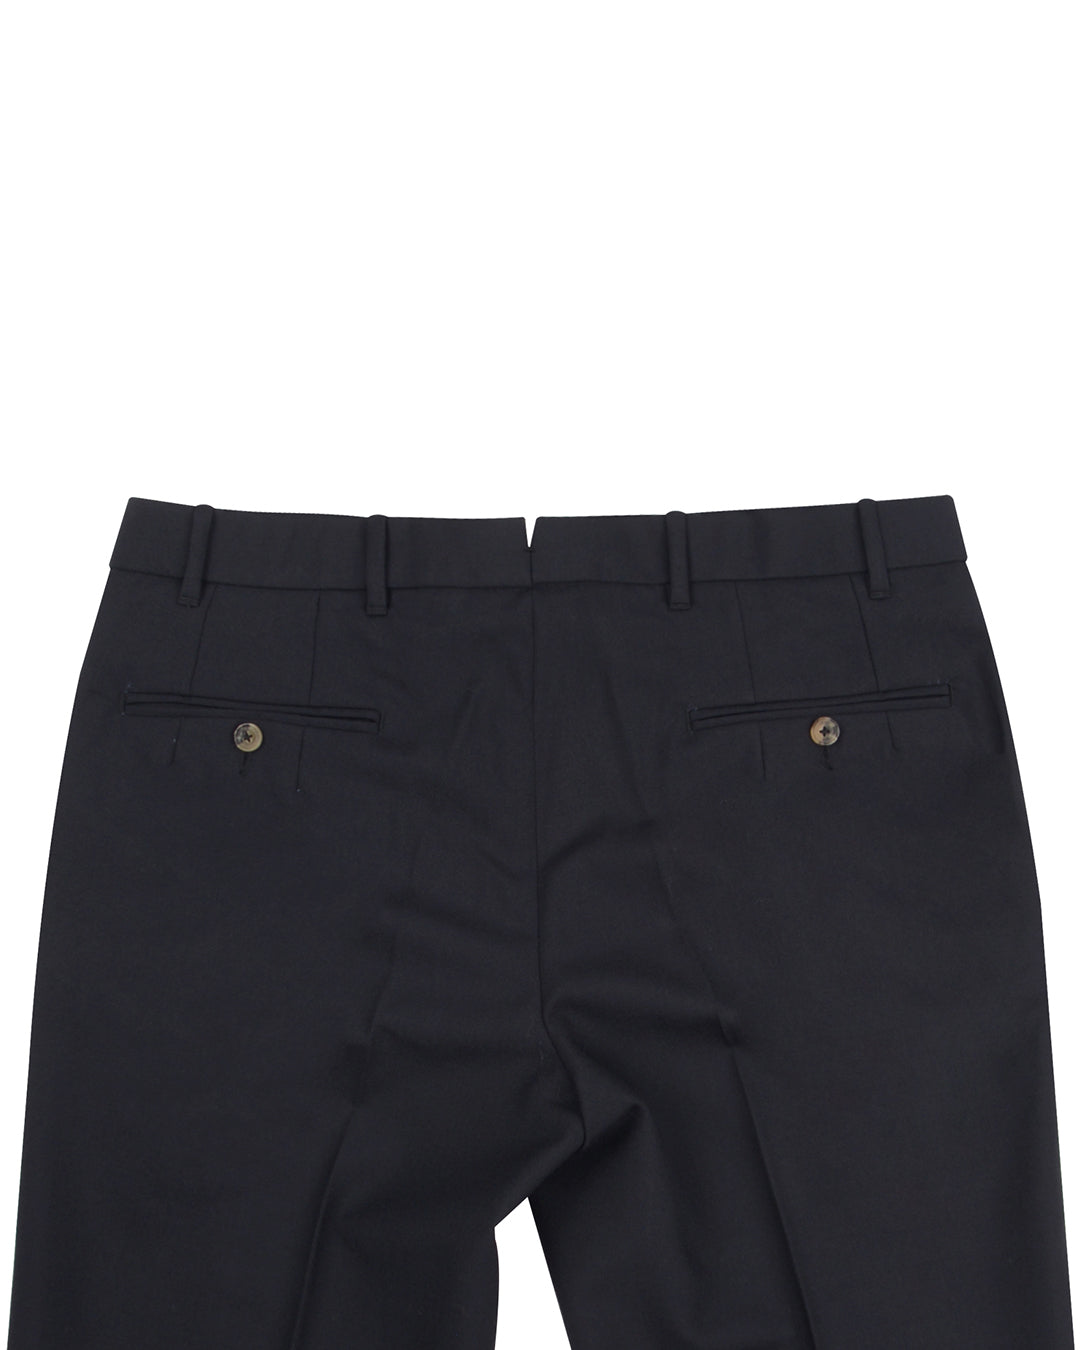 Dugdale Fine Worsted Pant- Midnight Plain